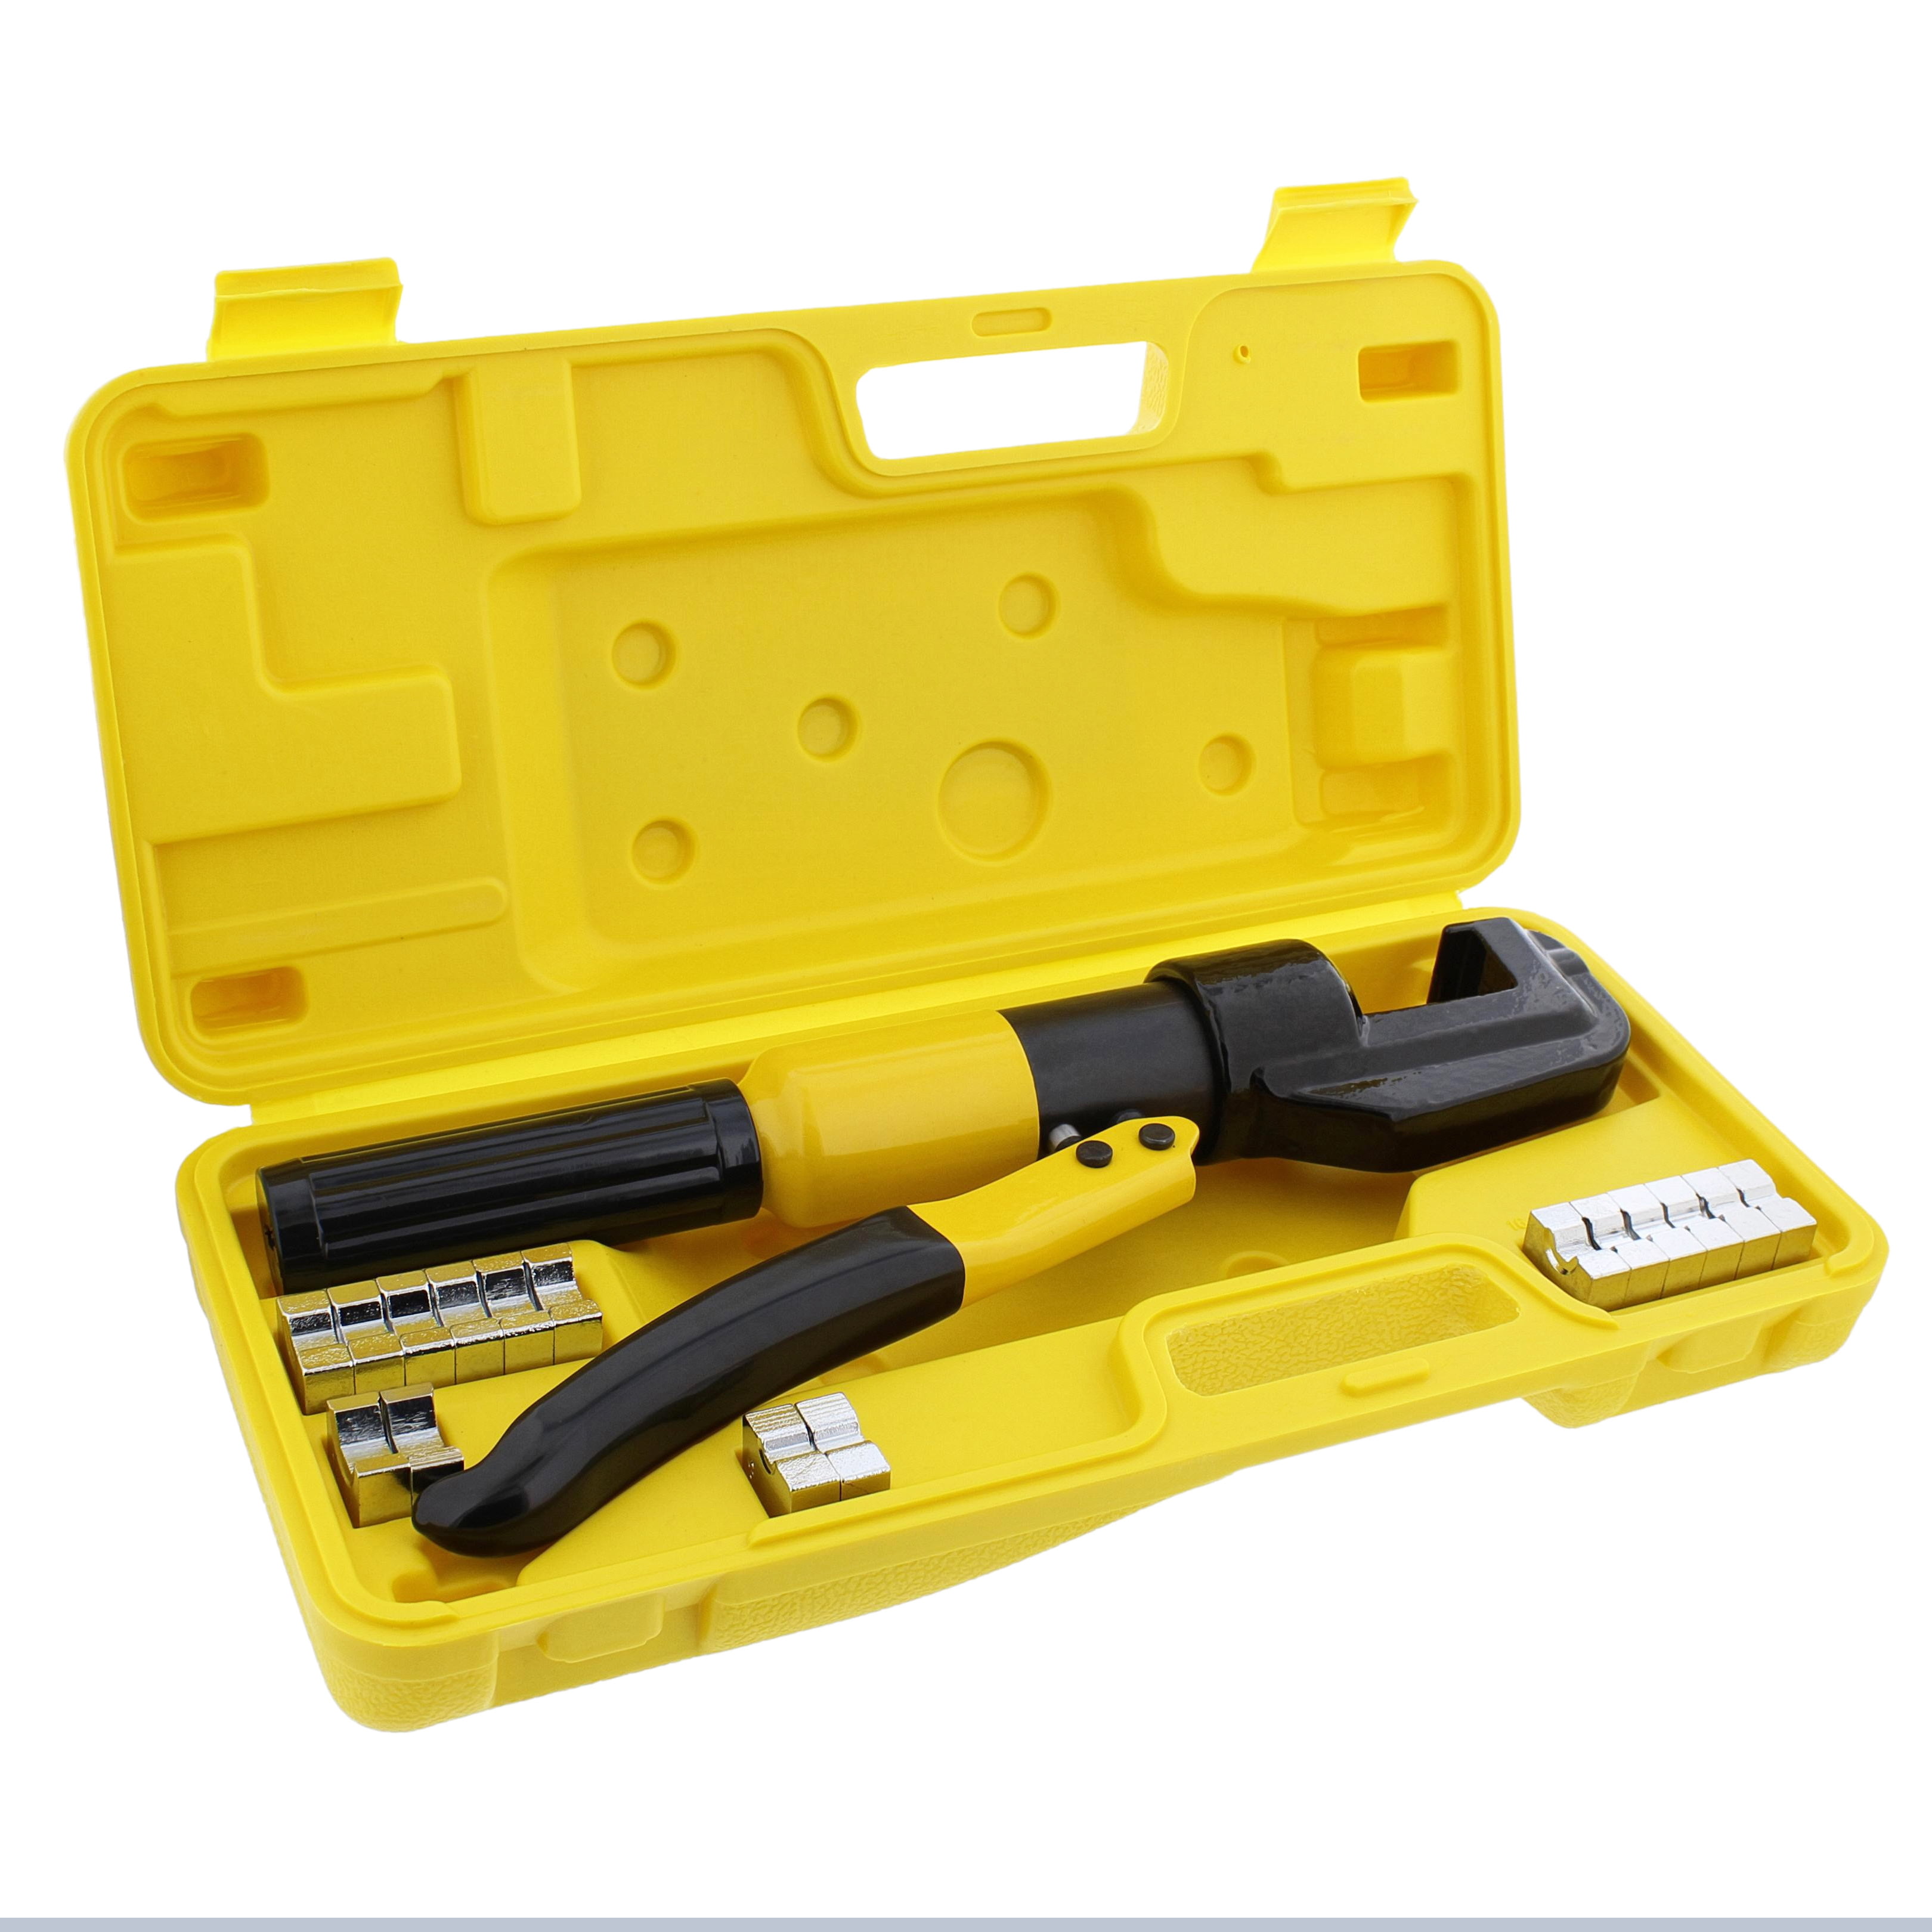 10 Ton Hydraulic Crimper Crimping Tool/w 8 Dies Wire Battery Cable Lug Termina 